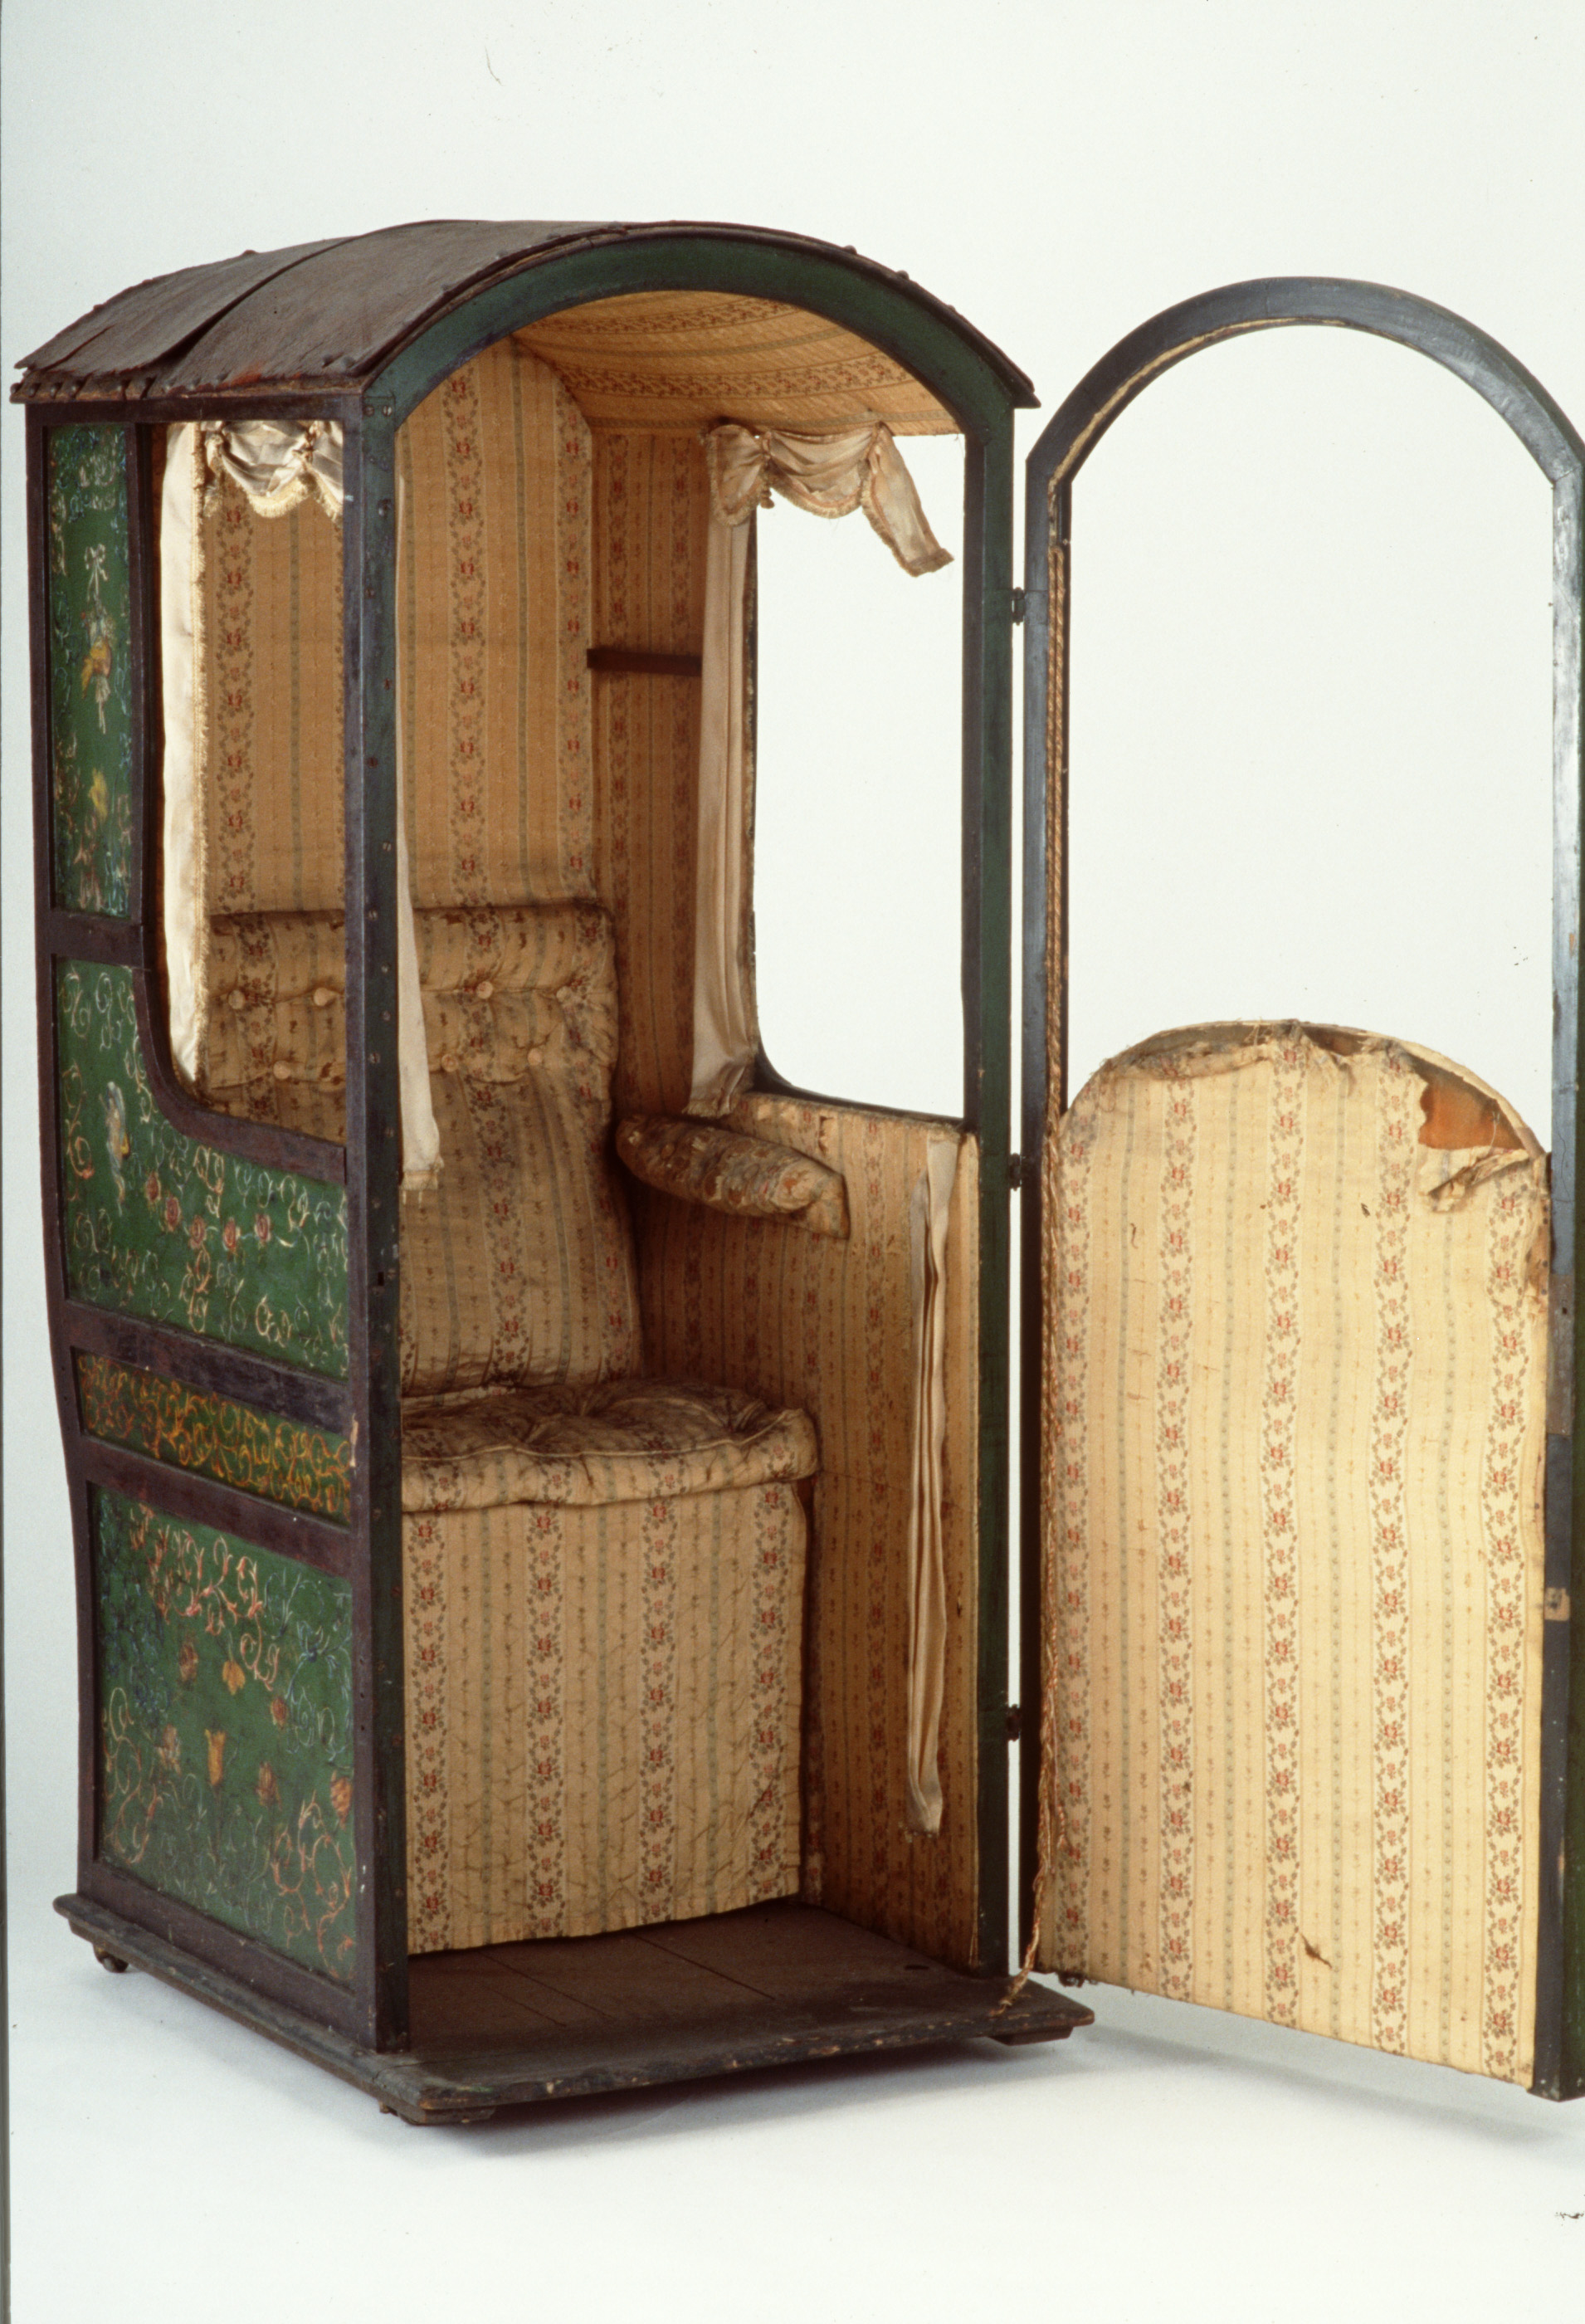 Sedan chair used as telephone box owned by F A P Hyland